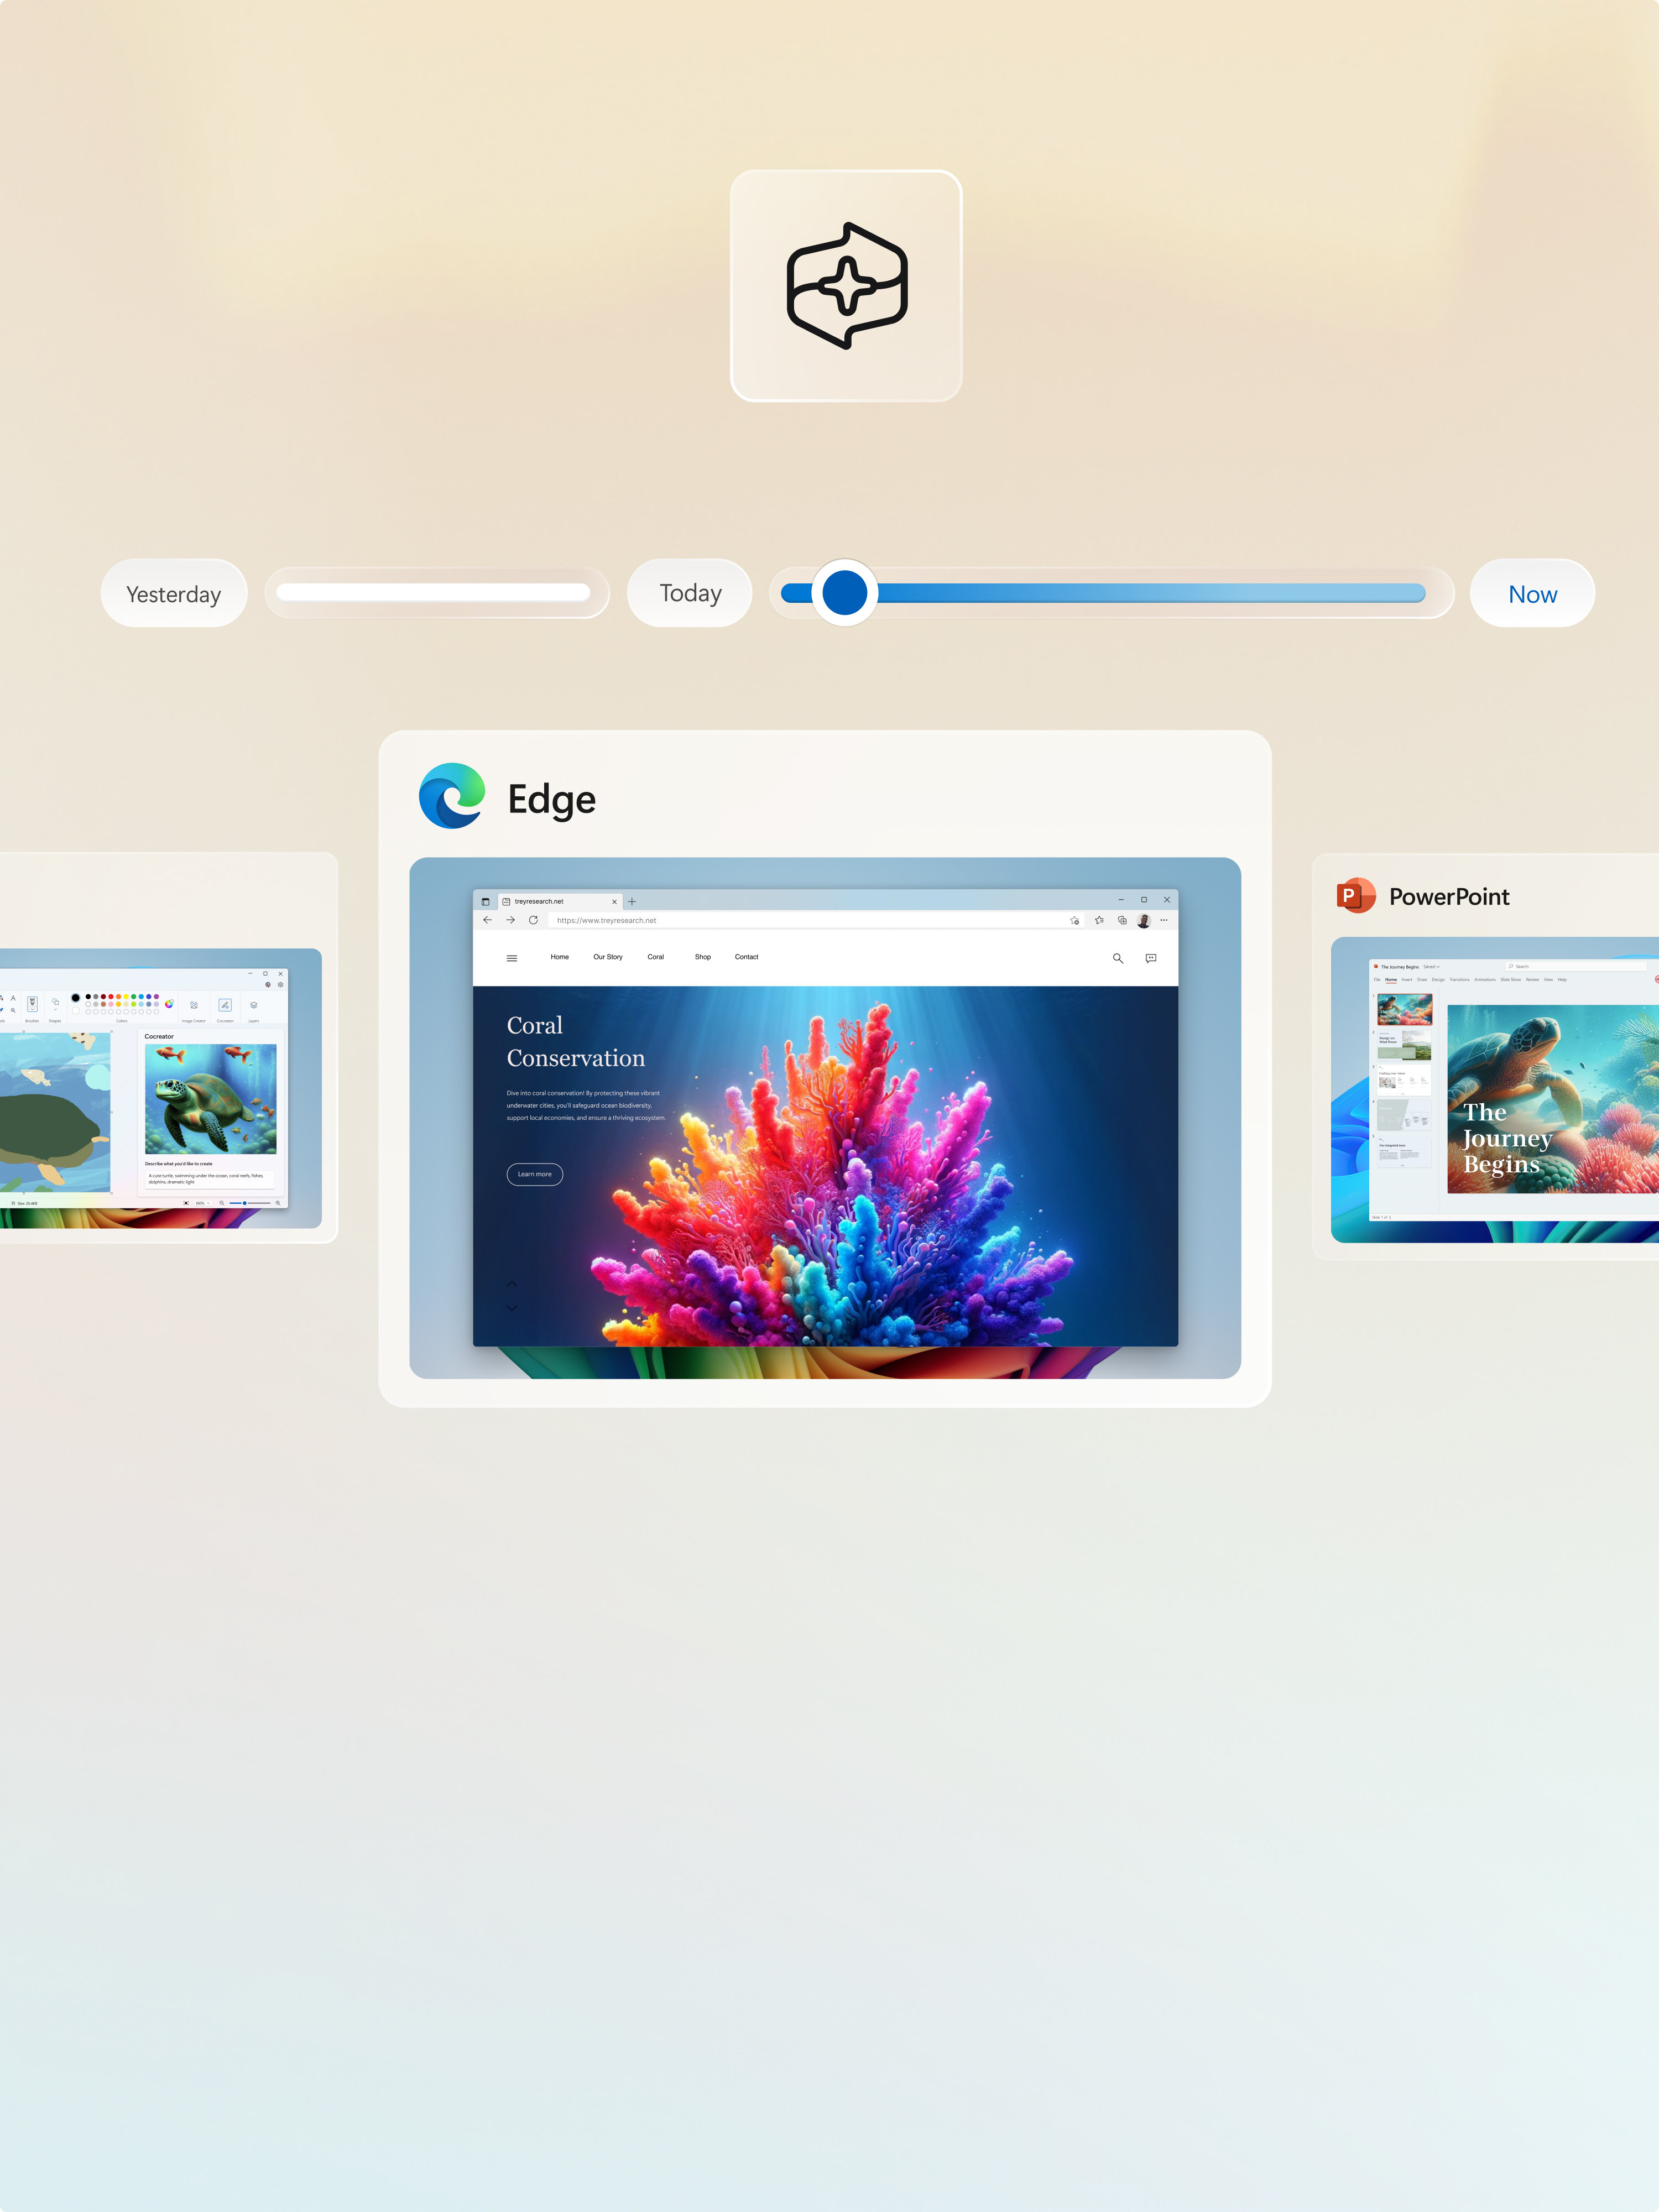 A PowerPoint window, and two Microsoft Edge windows